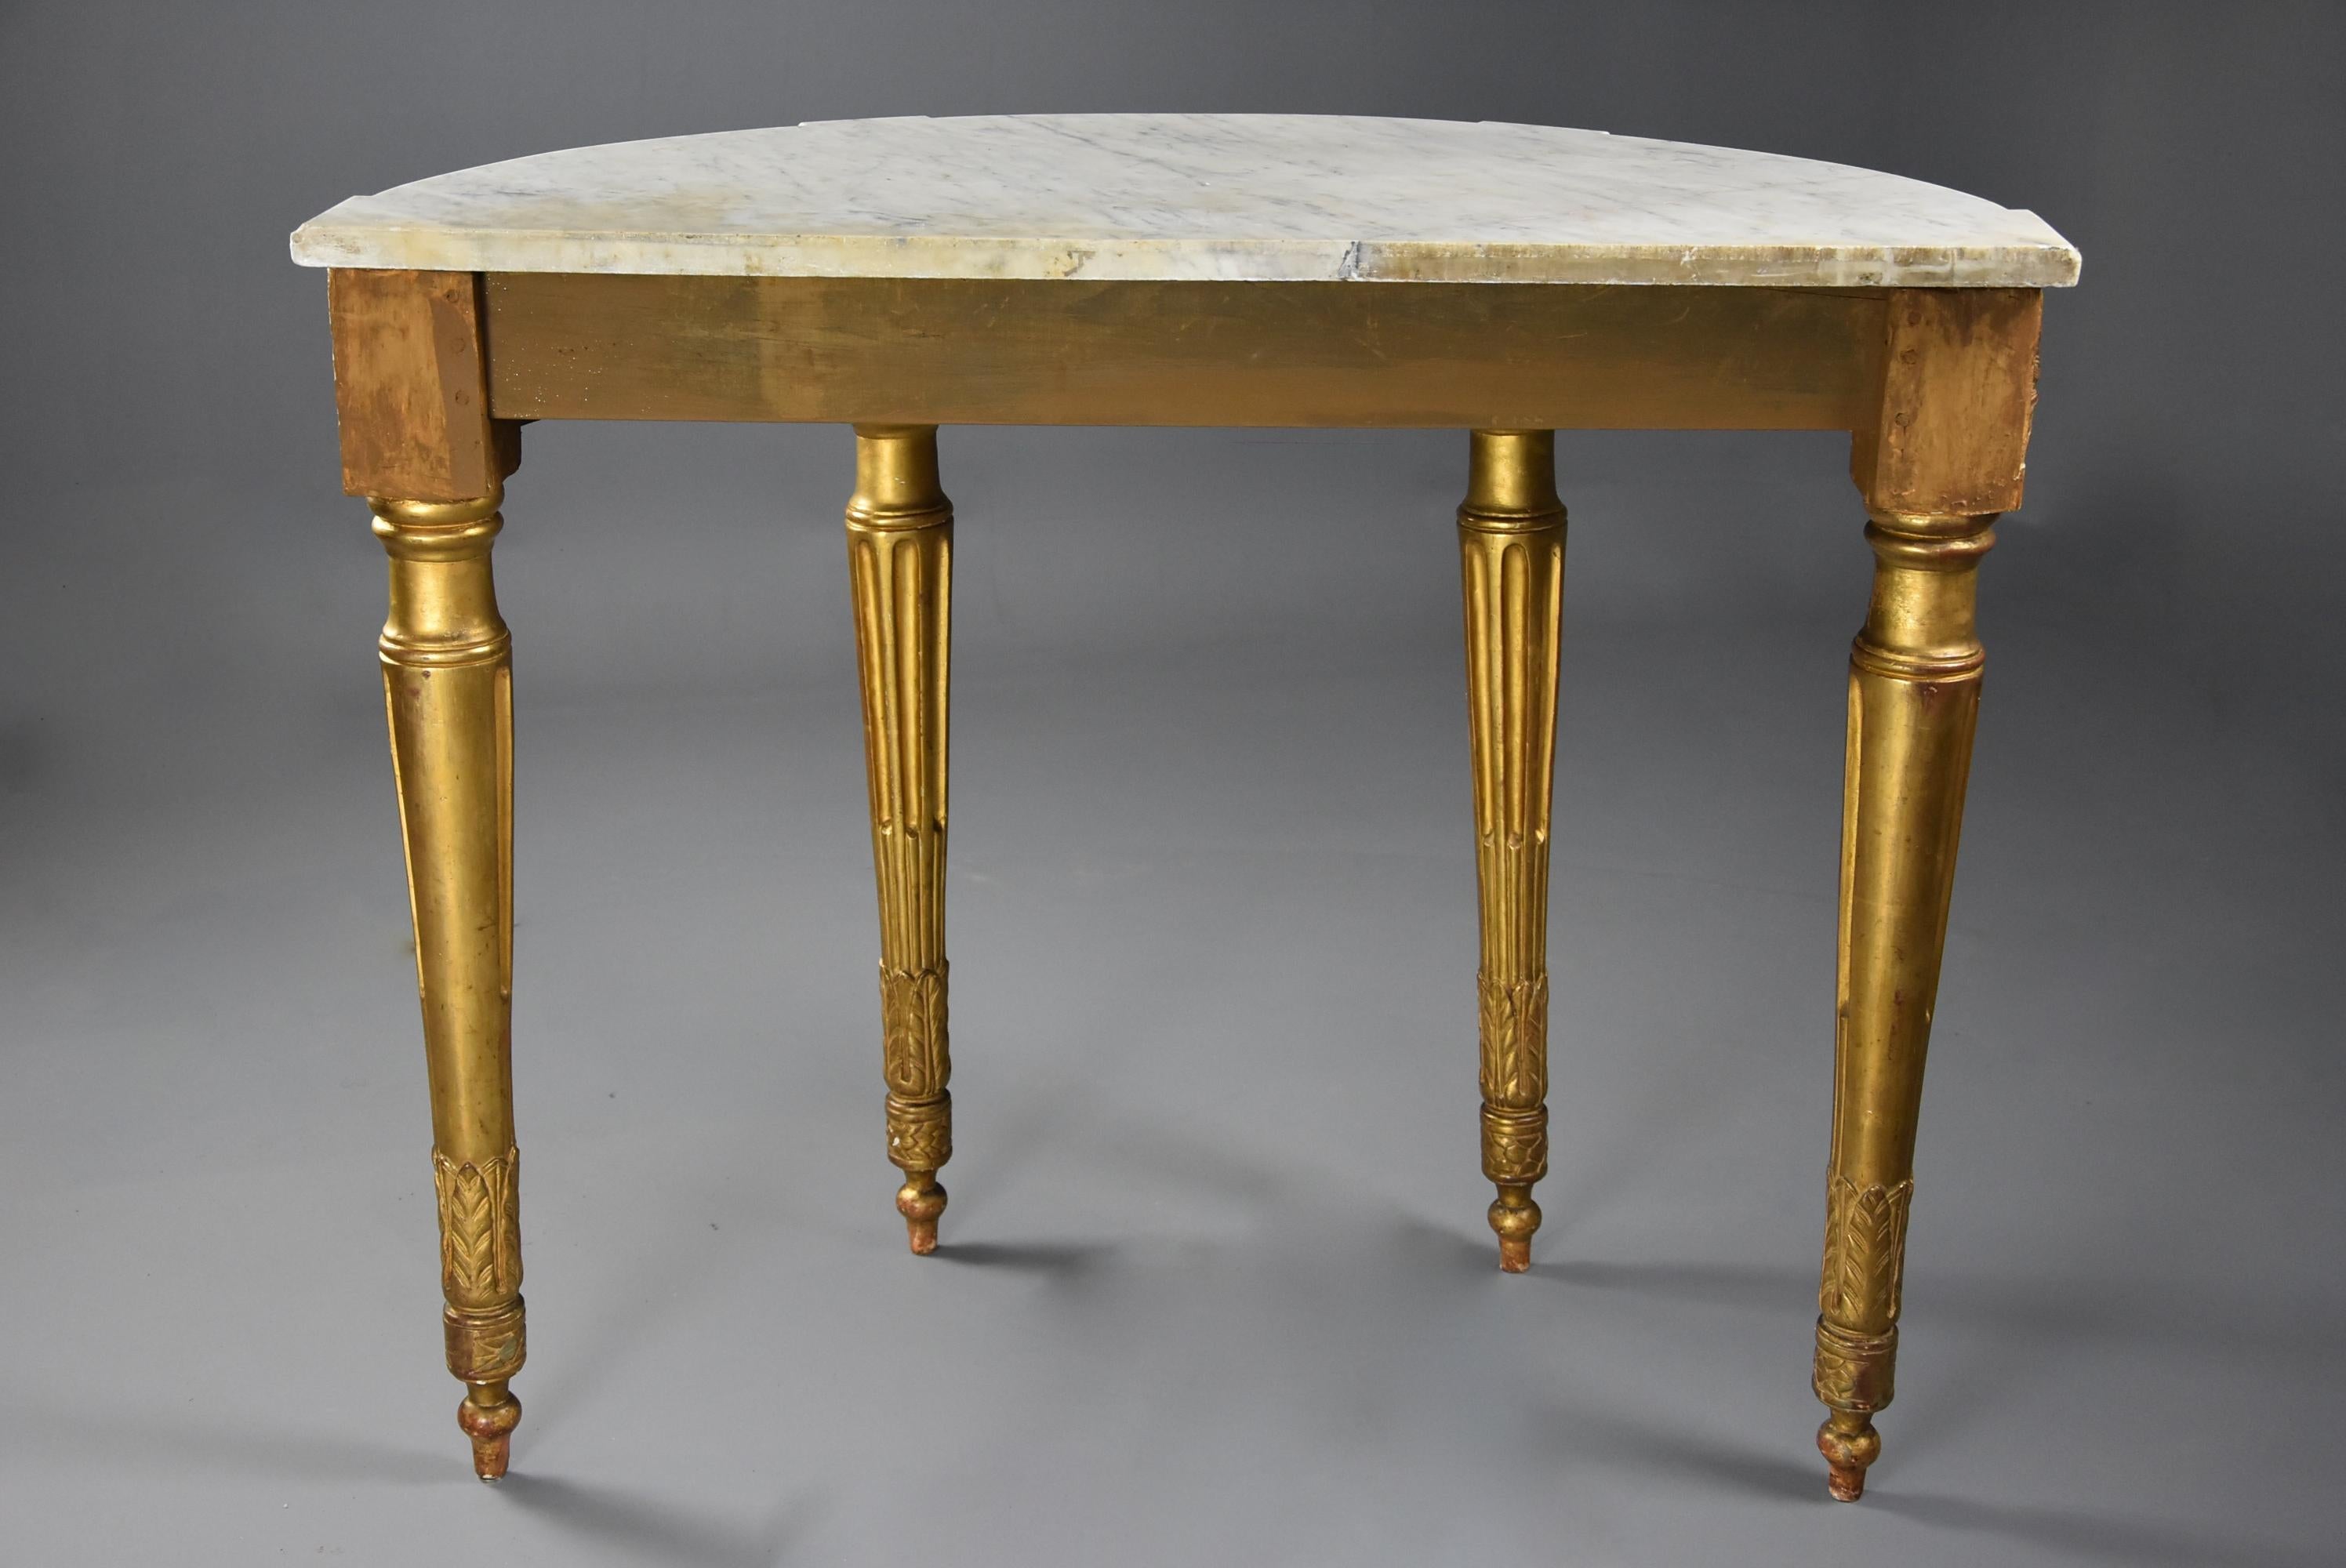 Highly Decorative 19th Century French Demilune Gilt Console Table For Sale 10